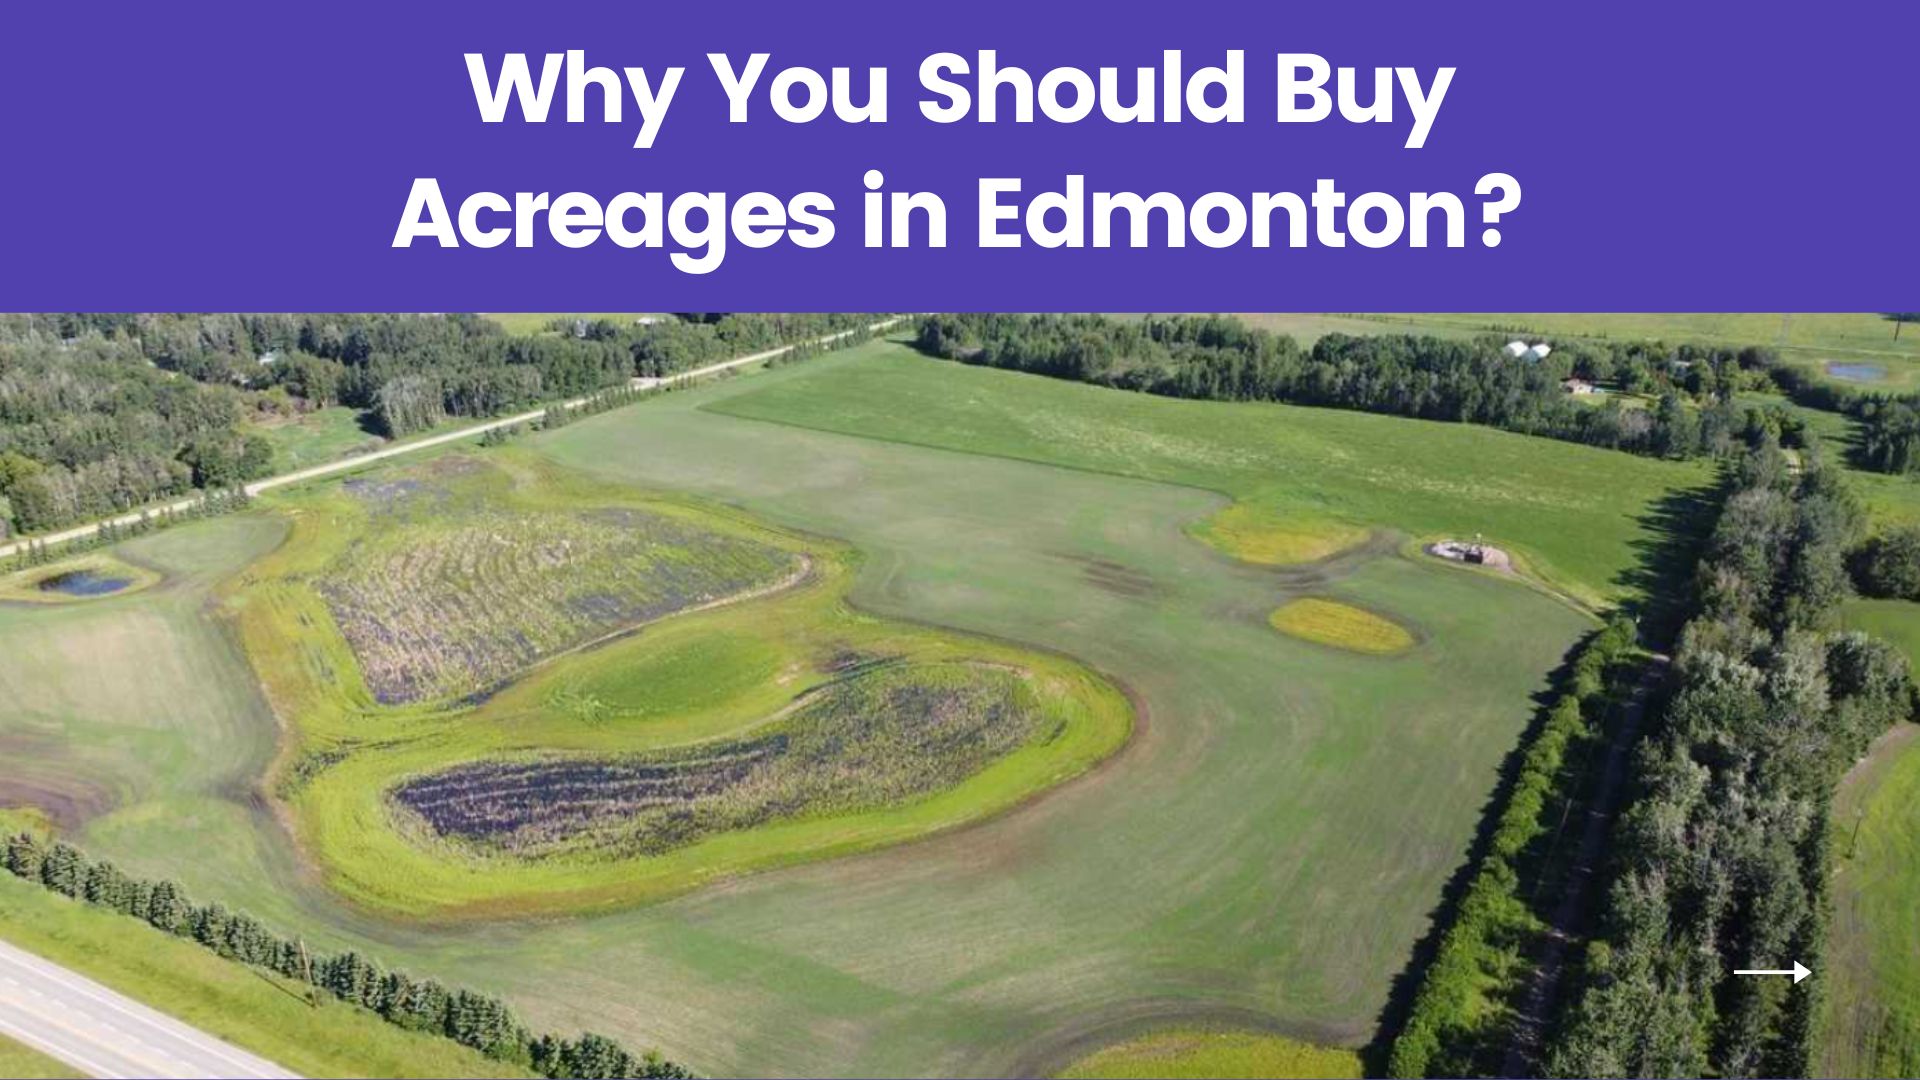 Why You Should Buy Acreages in Edmonton